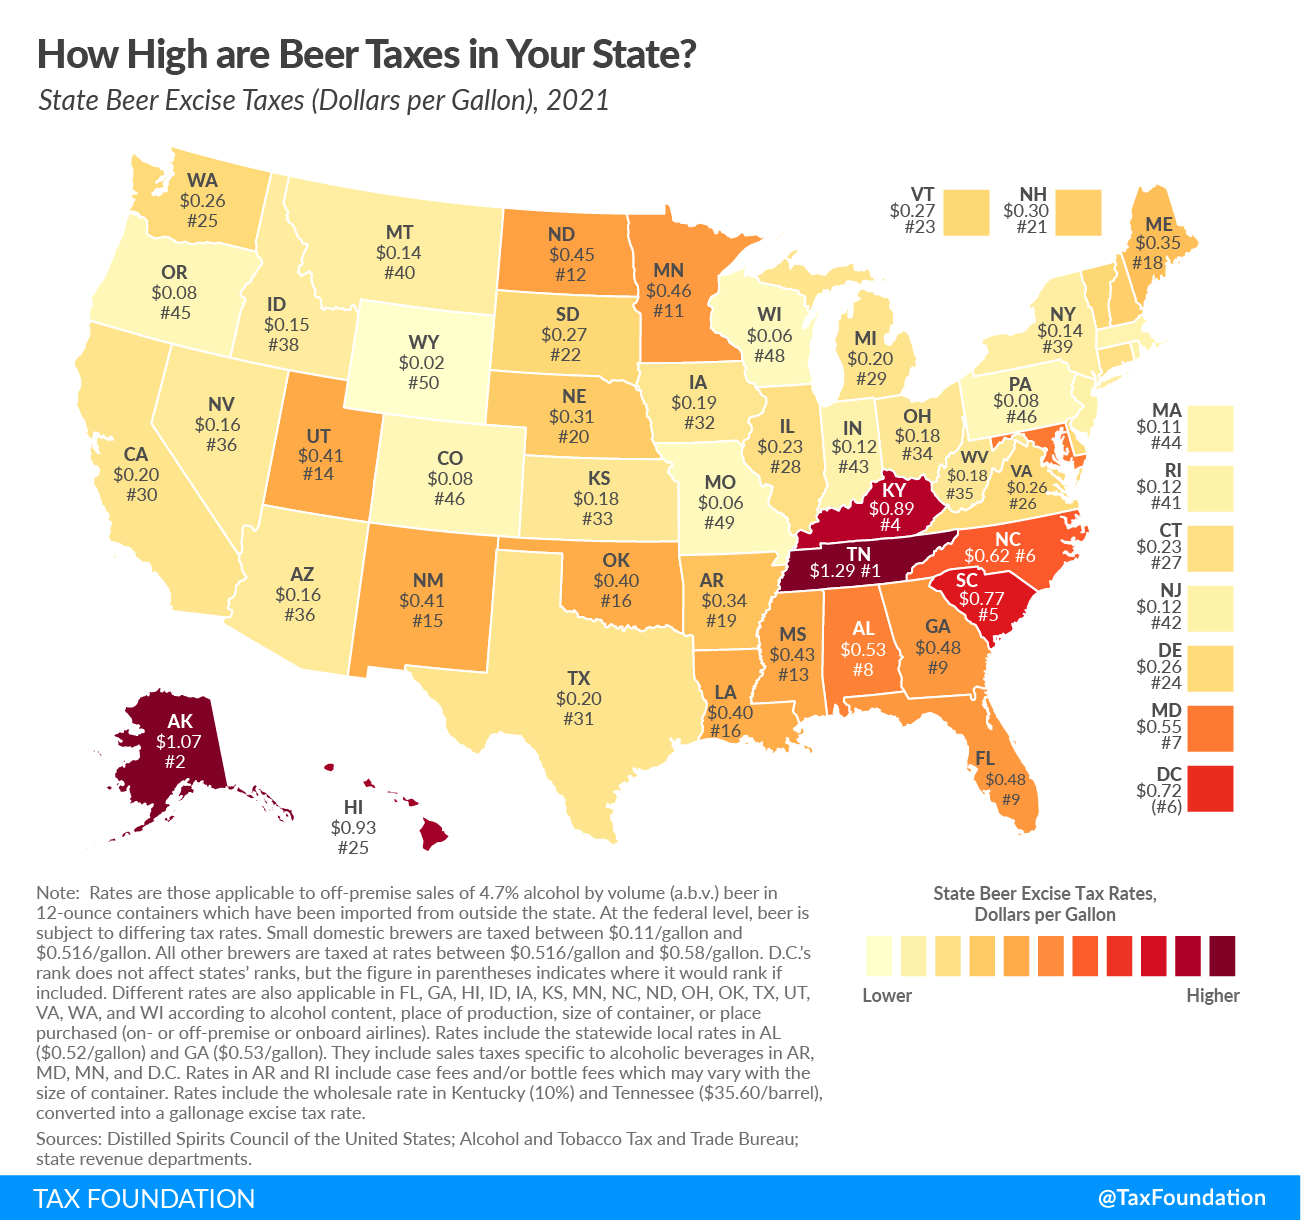 This map from The Tax Foundation documents how much excise tax each state levies for beer.